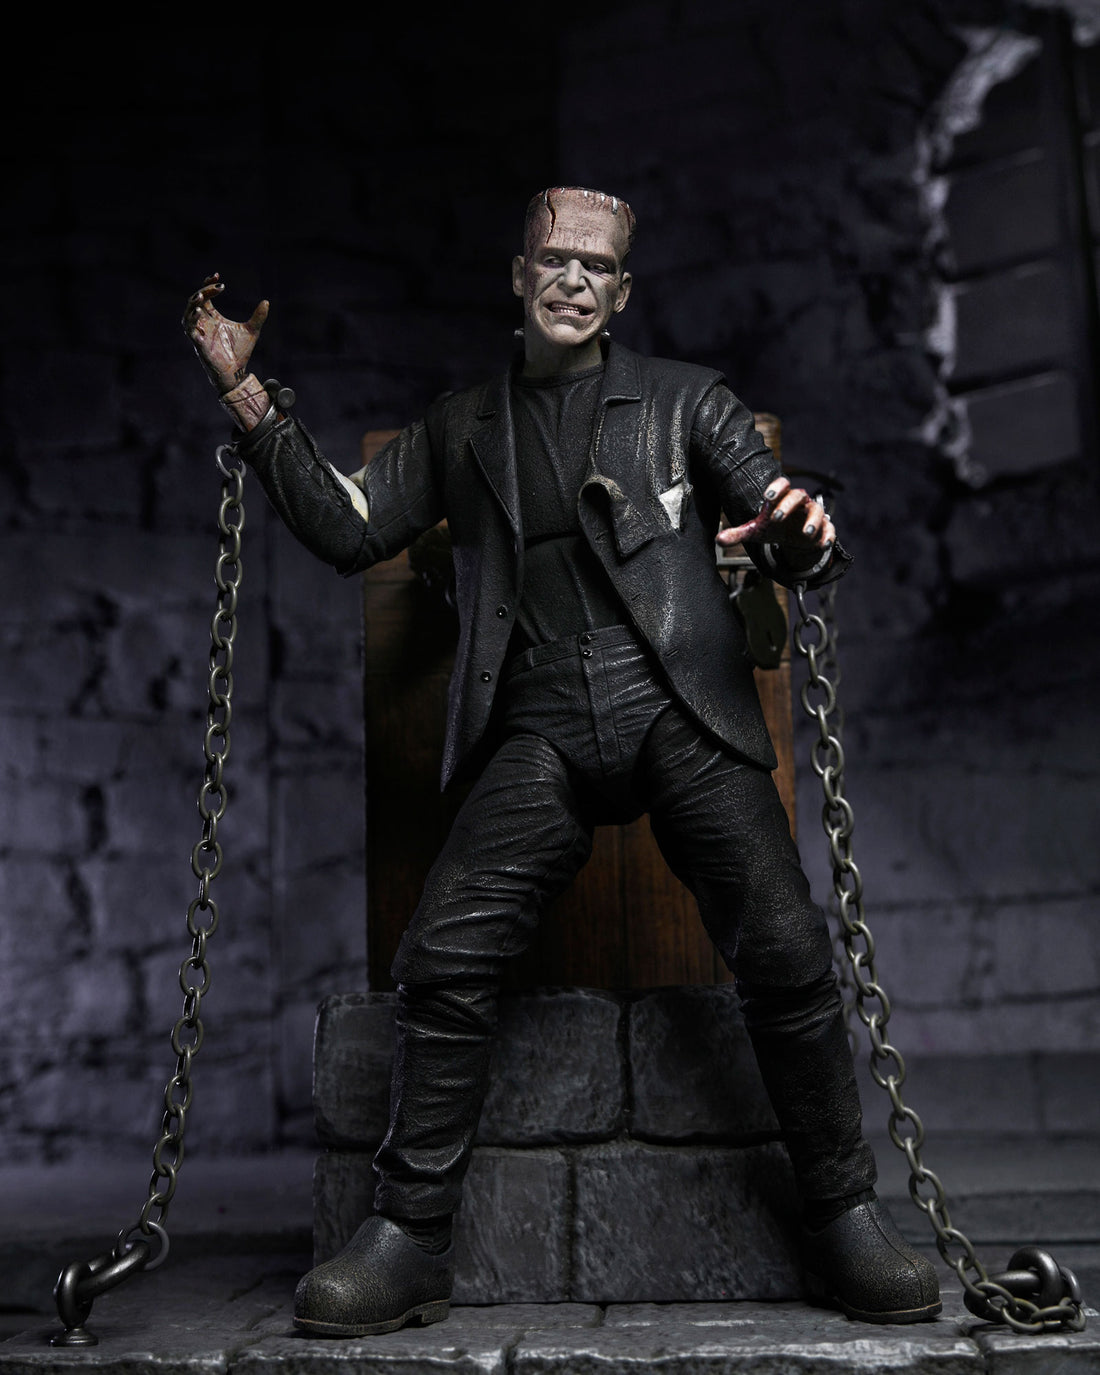 Universal Monsters’ Bride of Frankenstein – Ultimate Frankenstein’s Monster with Chair 7” Scale Action Figure 